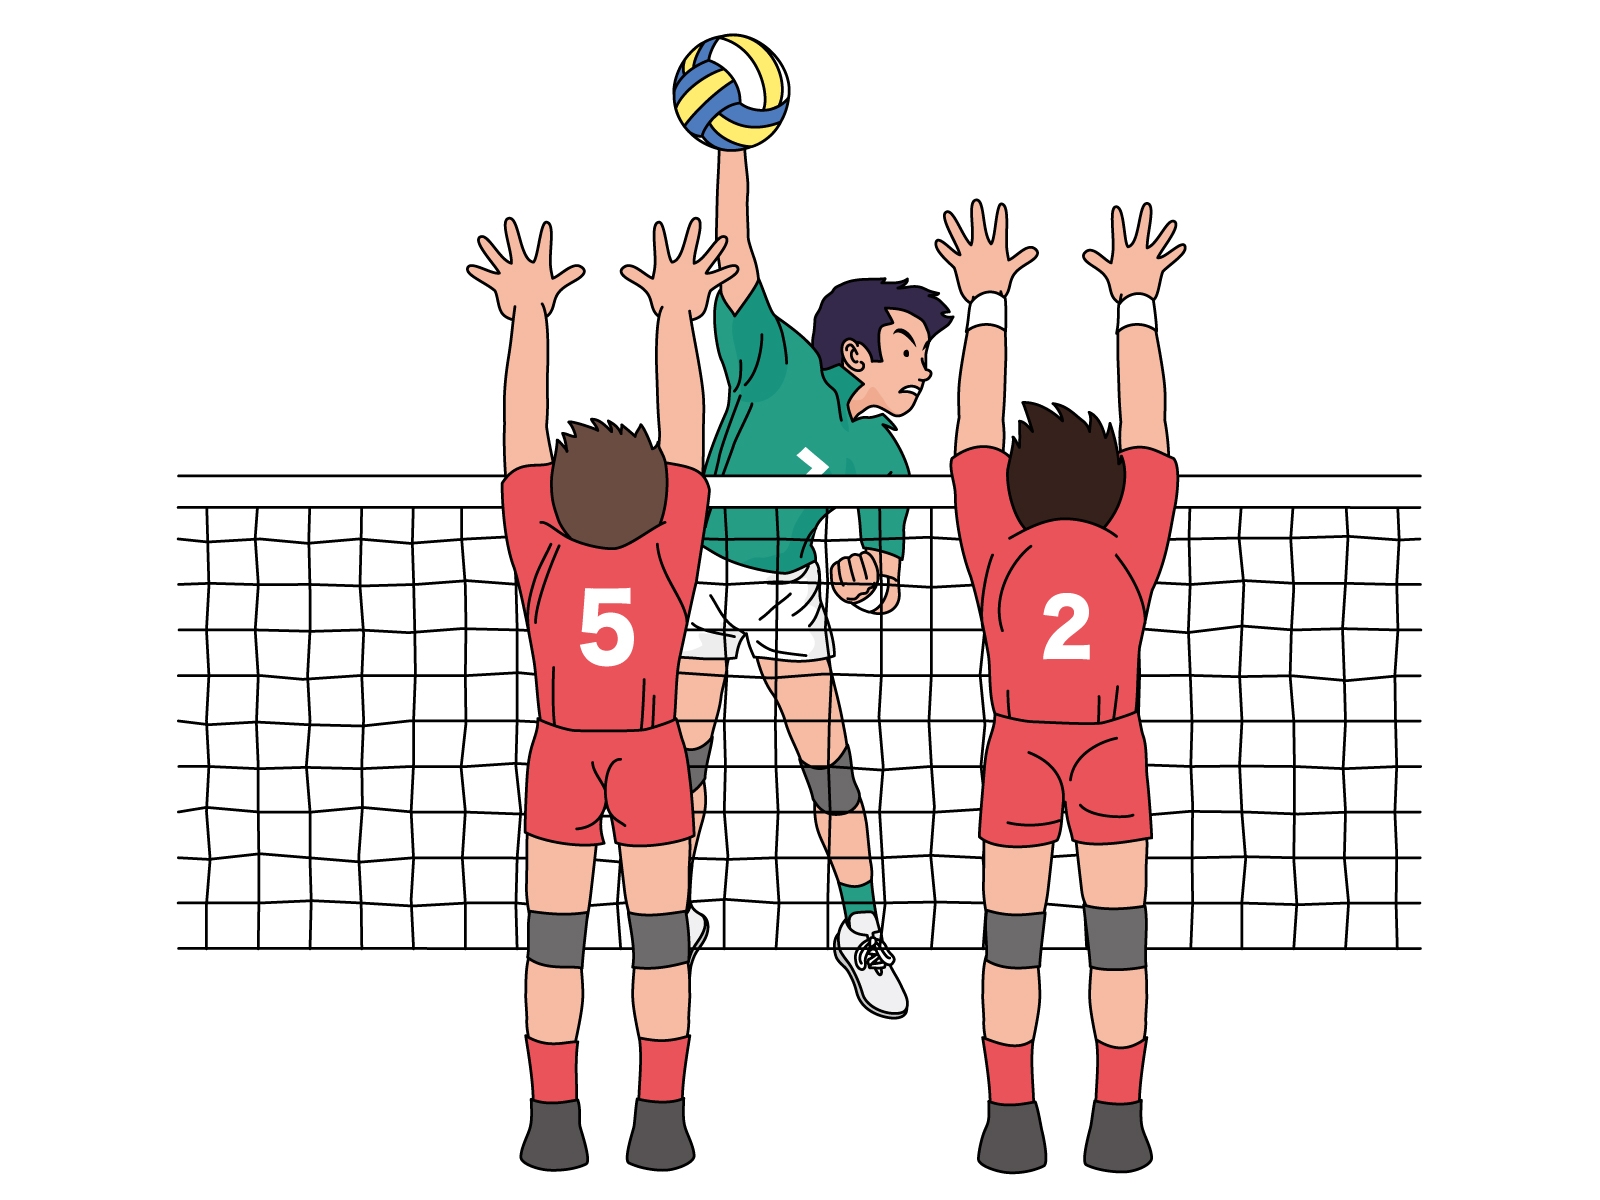 Bully classmate volleyball image